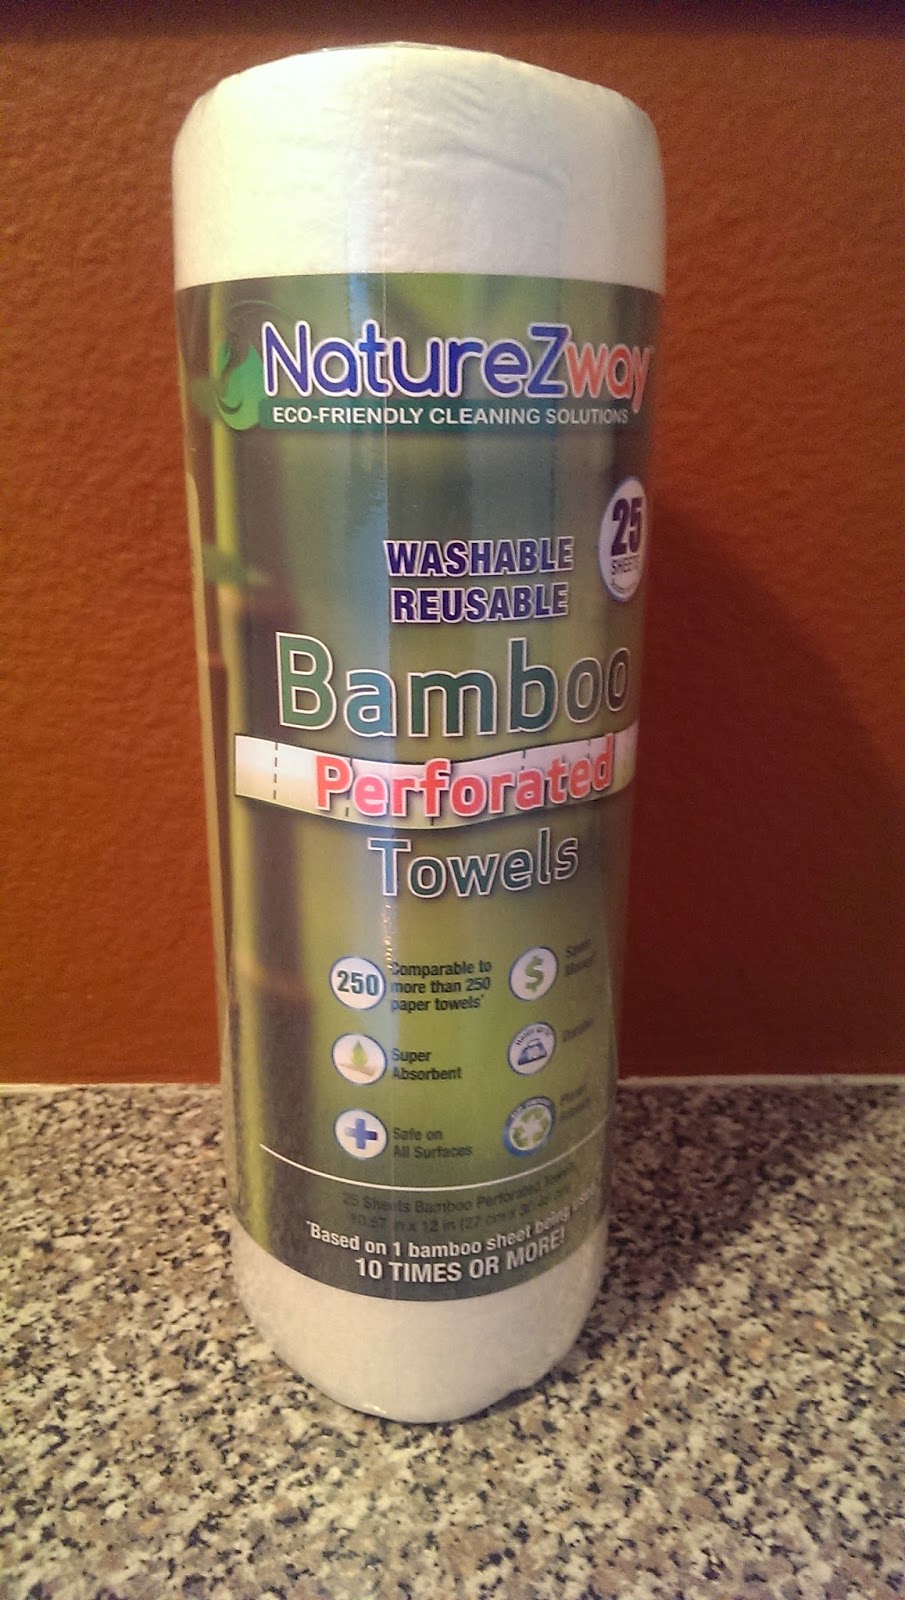 Bamboo%2Bcleaning%2Bsupplies Keeping My Home Clean with NatureZway Eco Friendly Products - NatureZway Review